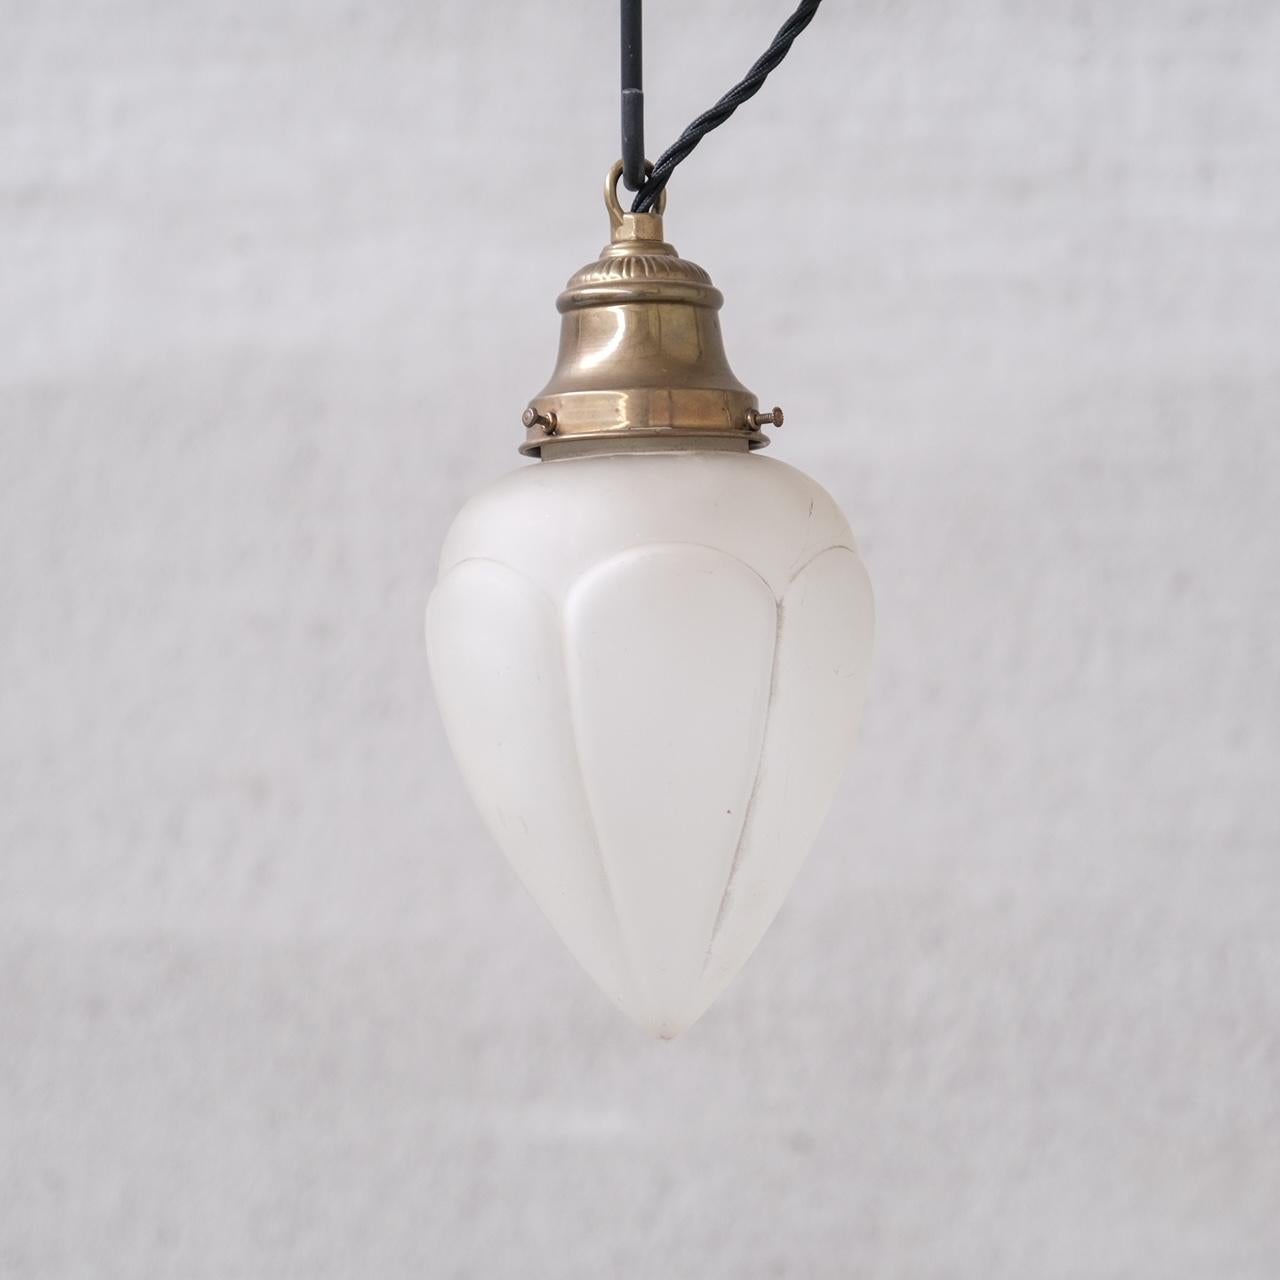 A pair of antique small pendants.

France, c1920s.

Opaque/etched glass pendant with brass gallery.

Price is for the pair.

No chain or rose was retained, however they are easy to source online.

Good vintage condtion, re-wired and PAT